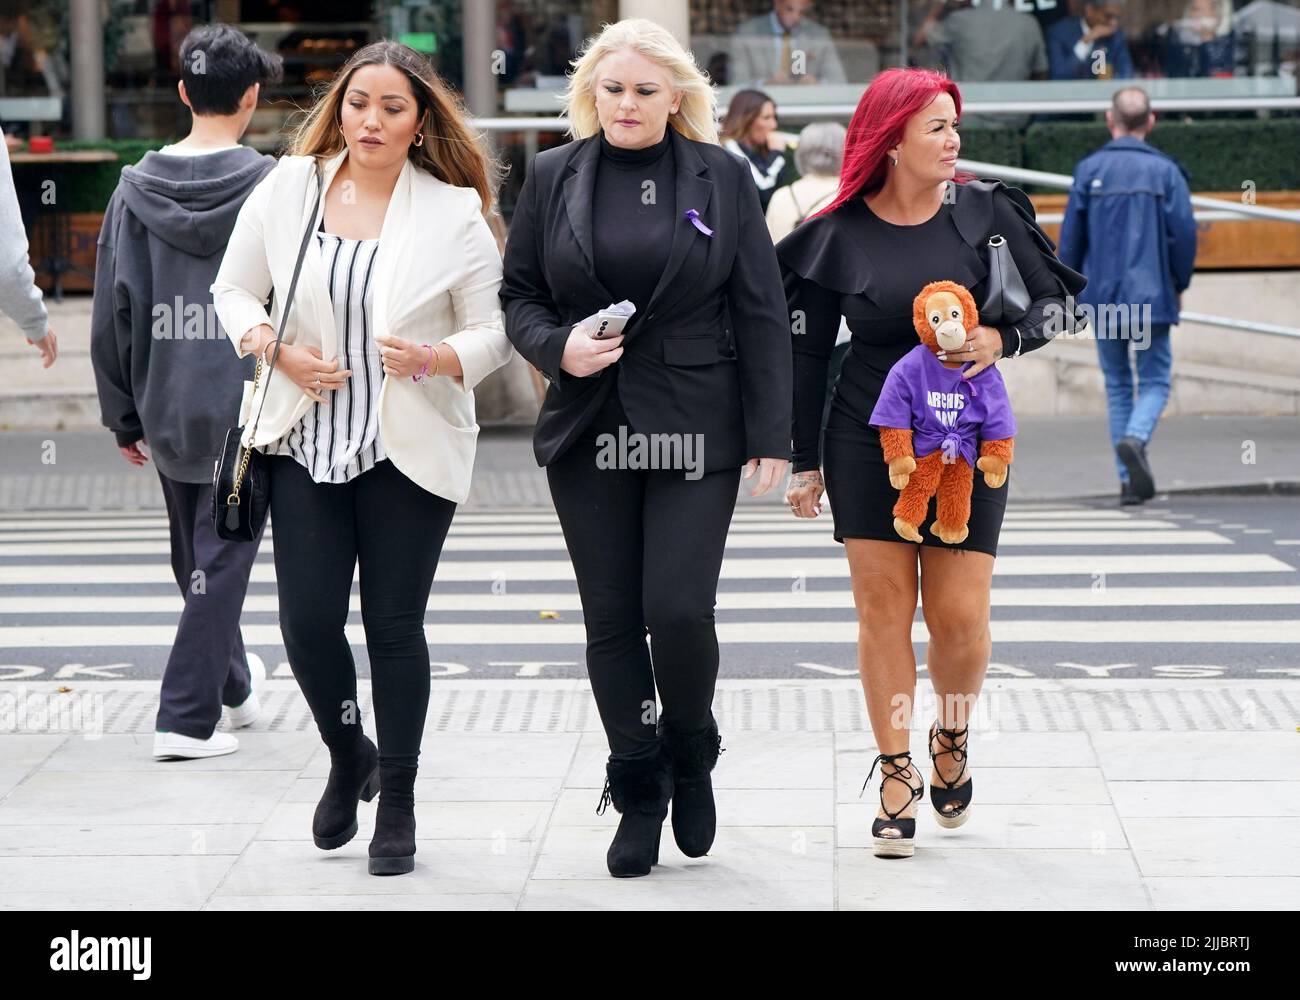 The mother of Archie Battersbee, Hollie Dance (centre), arrives at the Royal Courts Of Justice in London to ask Court of Appeal judges to overturn a ruling by High Court judge Mr Justice Hayden, who decided that life-support treatment for their 12-year-old son who suffered a 'devastating' brain injury could stop. Picture date: Monday July 25, 2022. Stock Photo